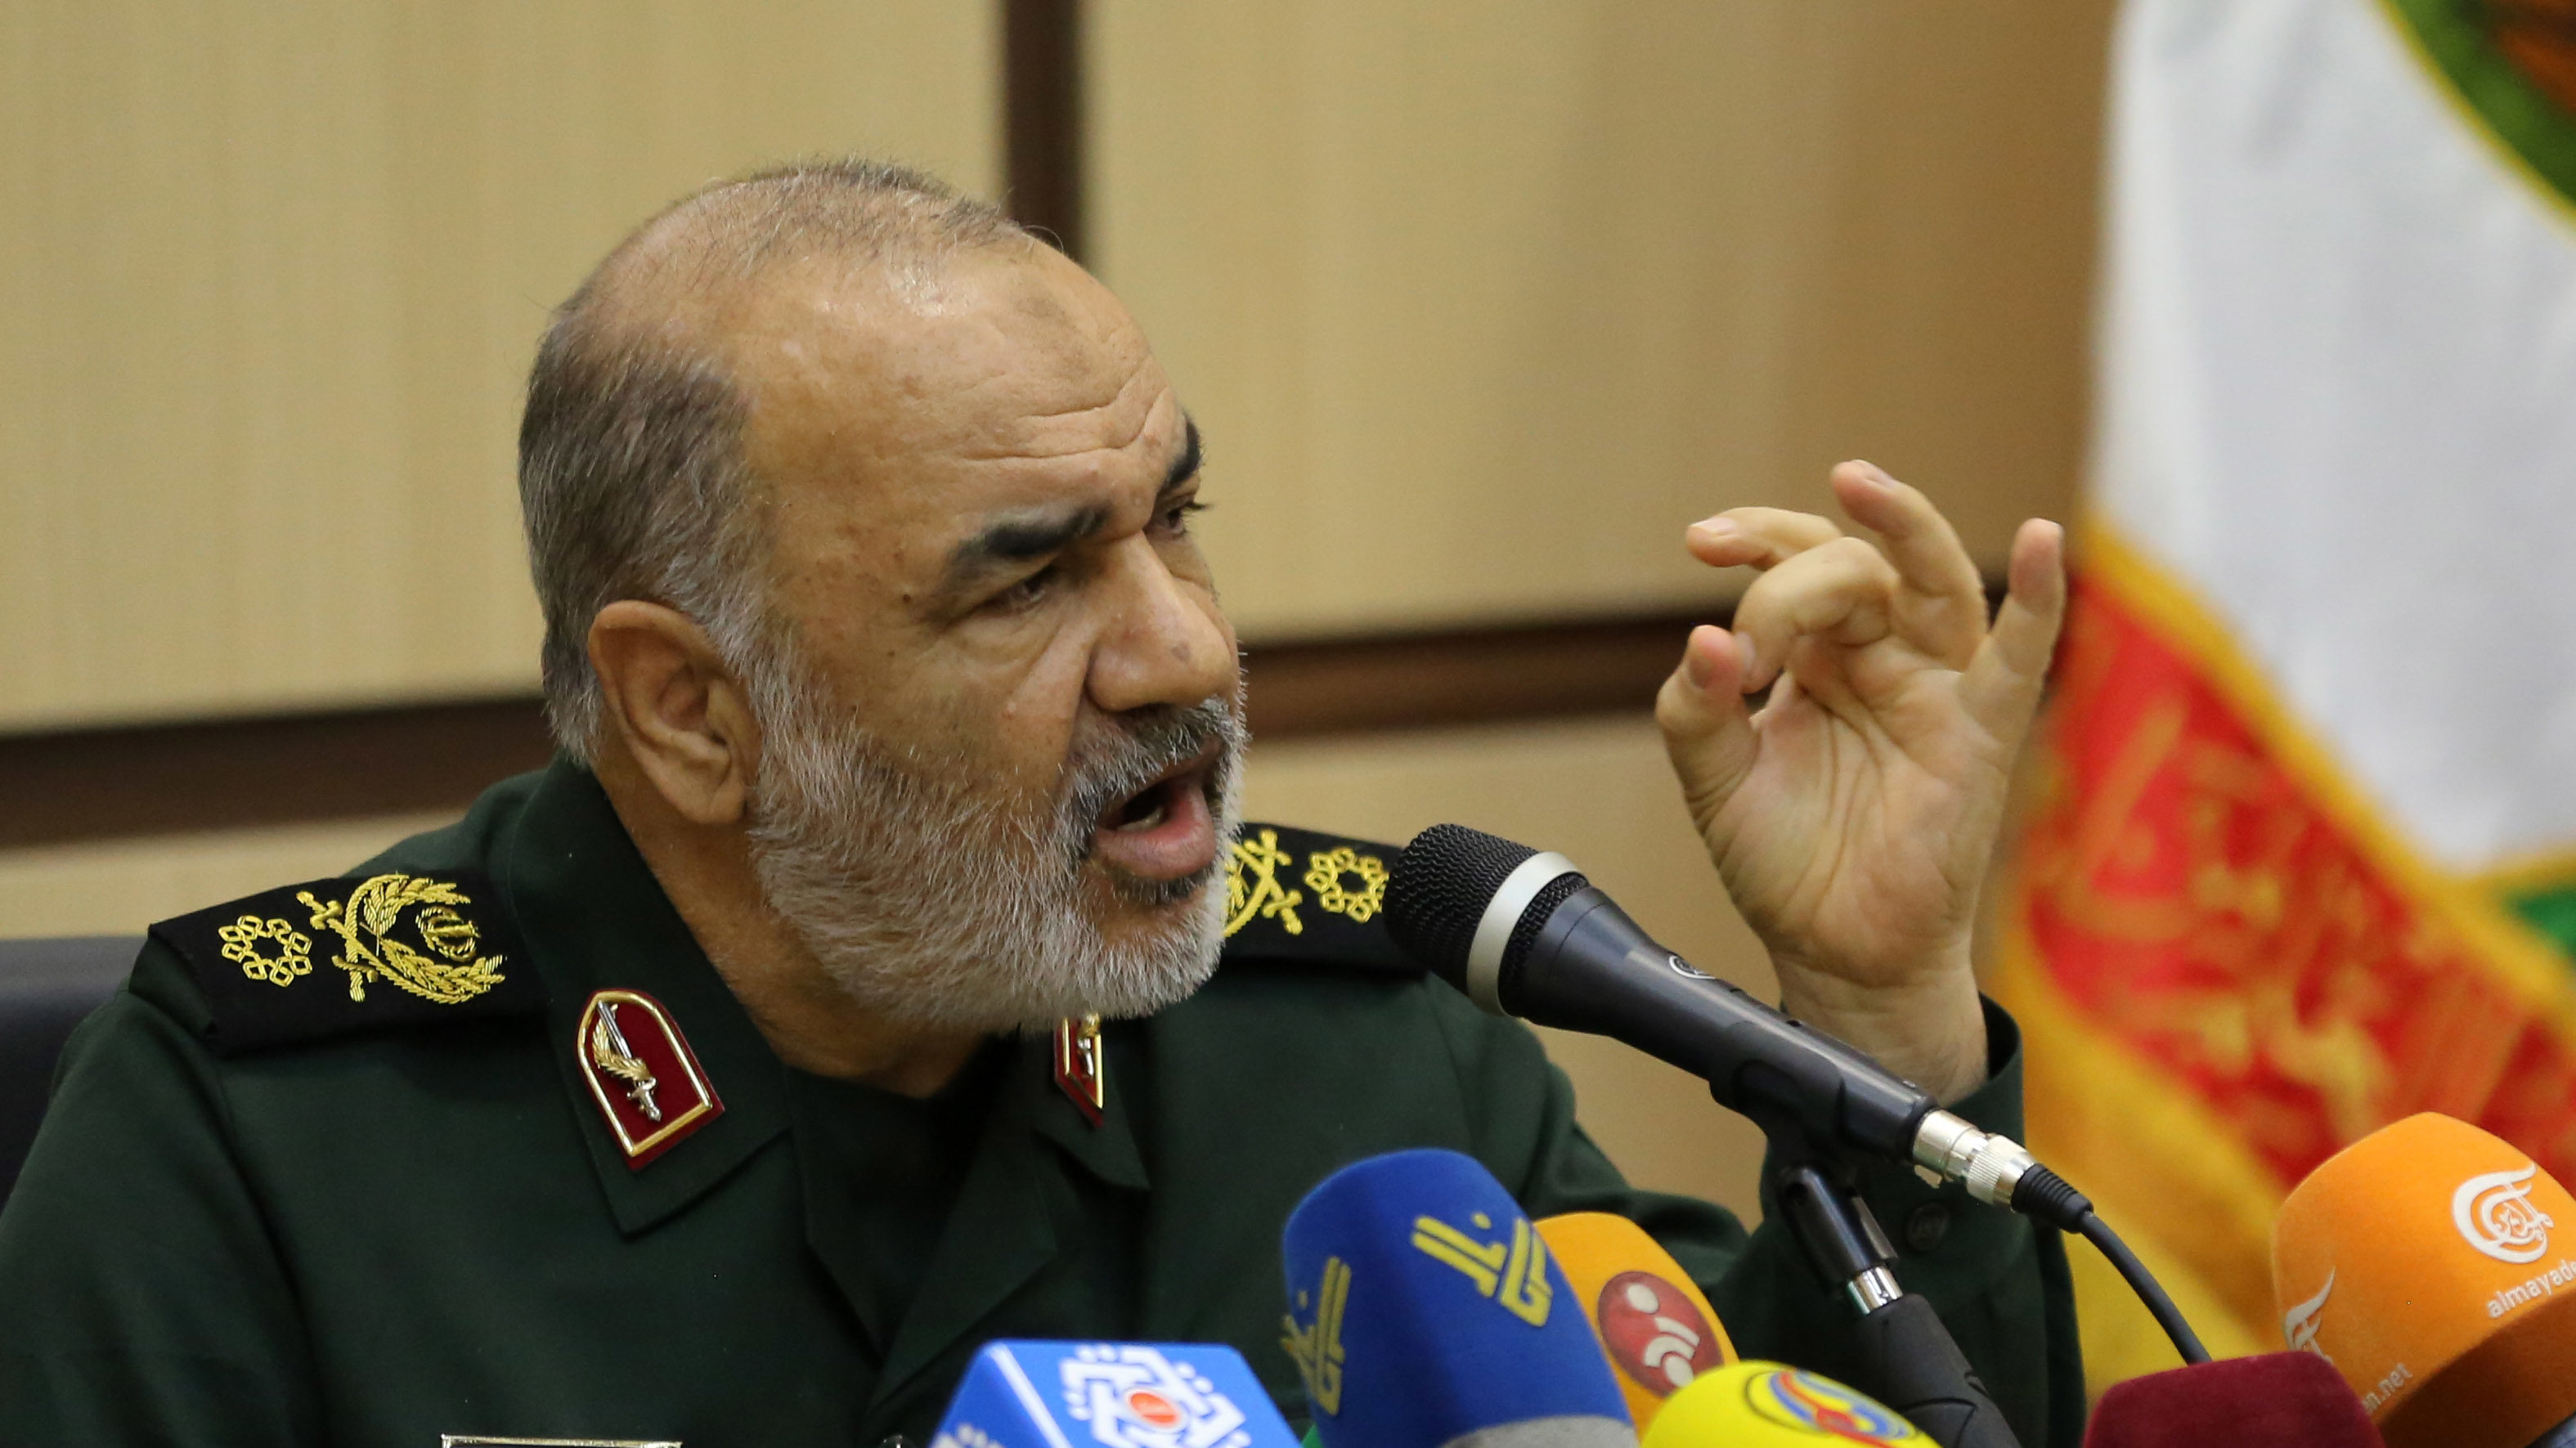 Iran: Any Country that Attacks Will be ‘Main Battlefield’